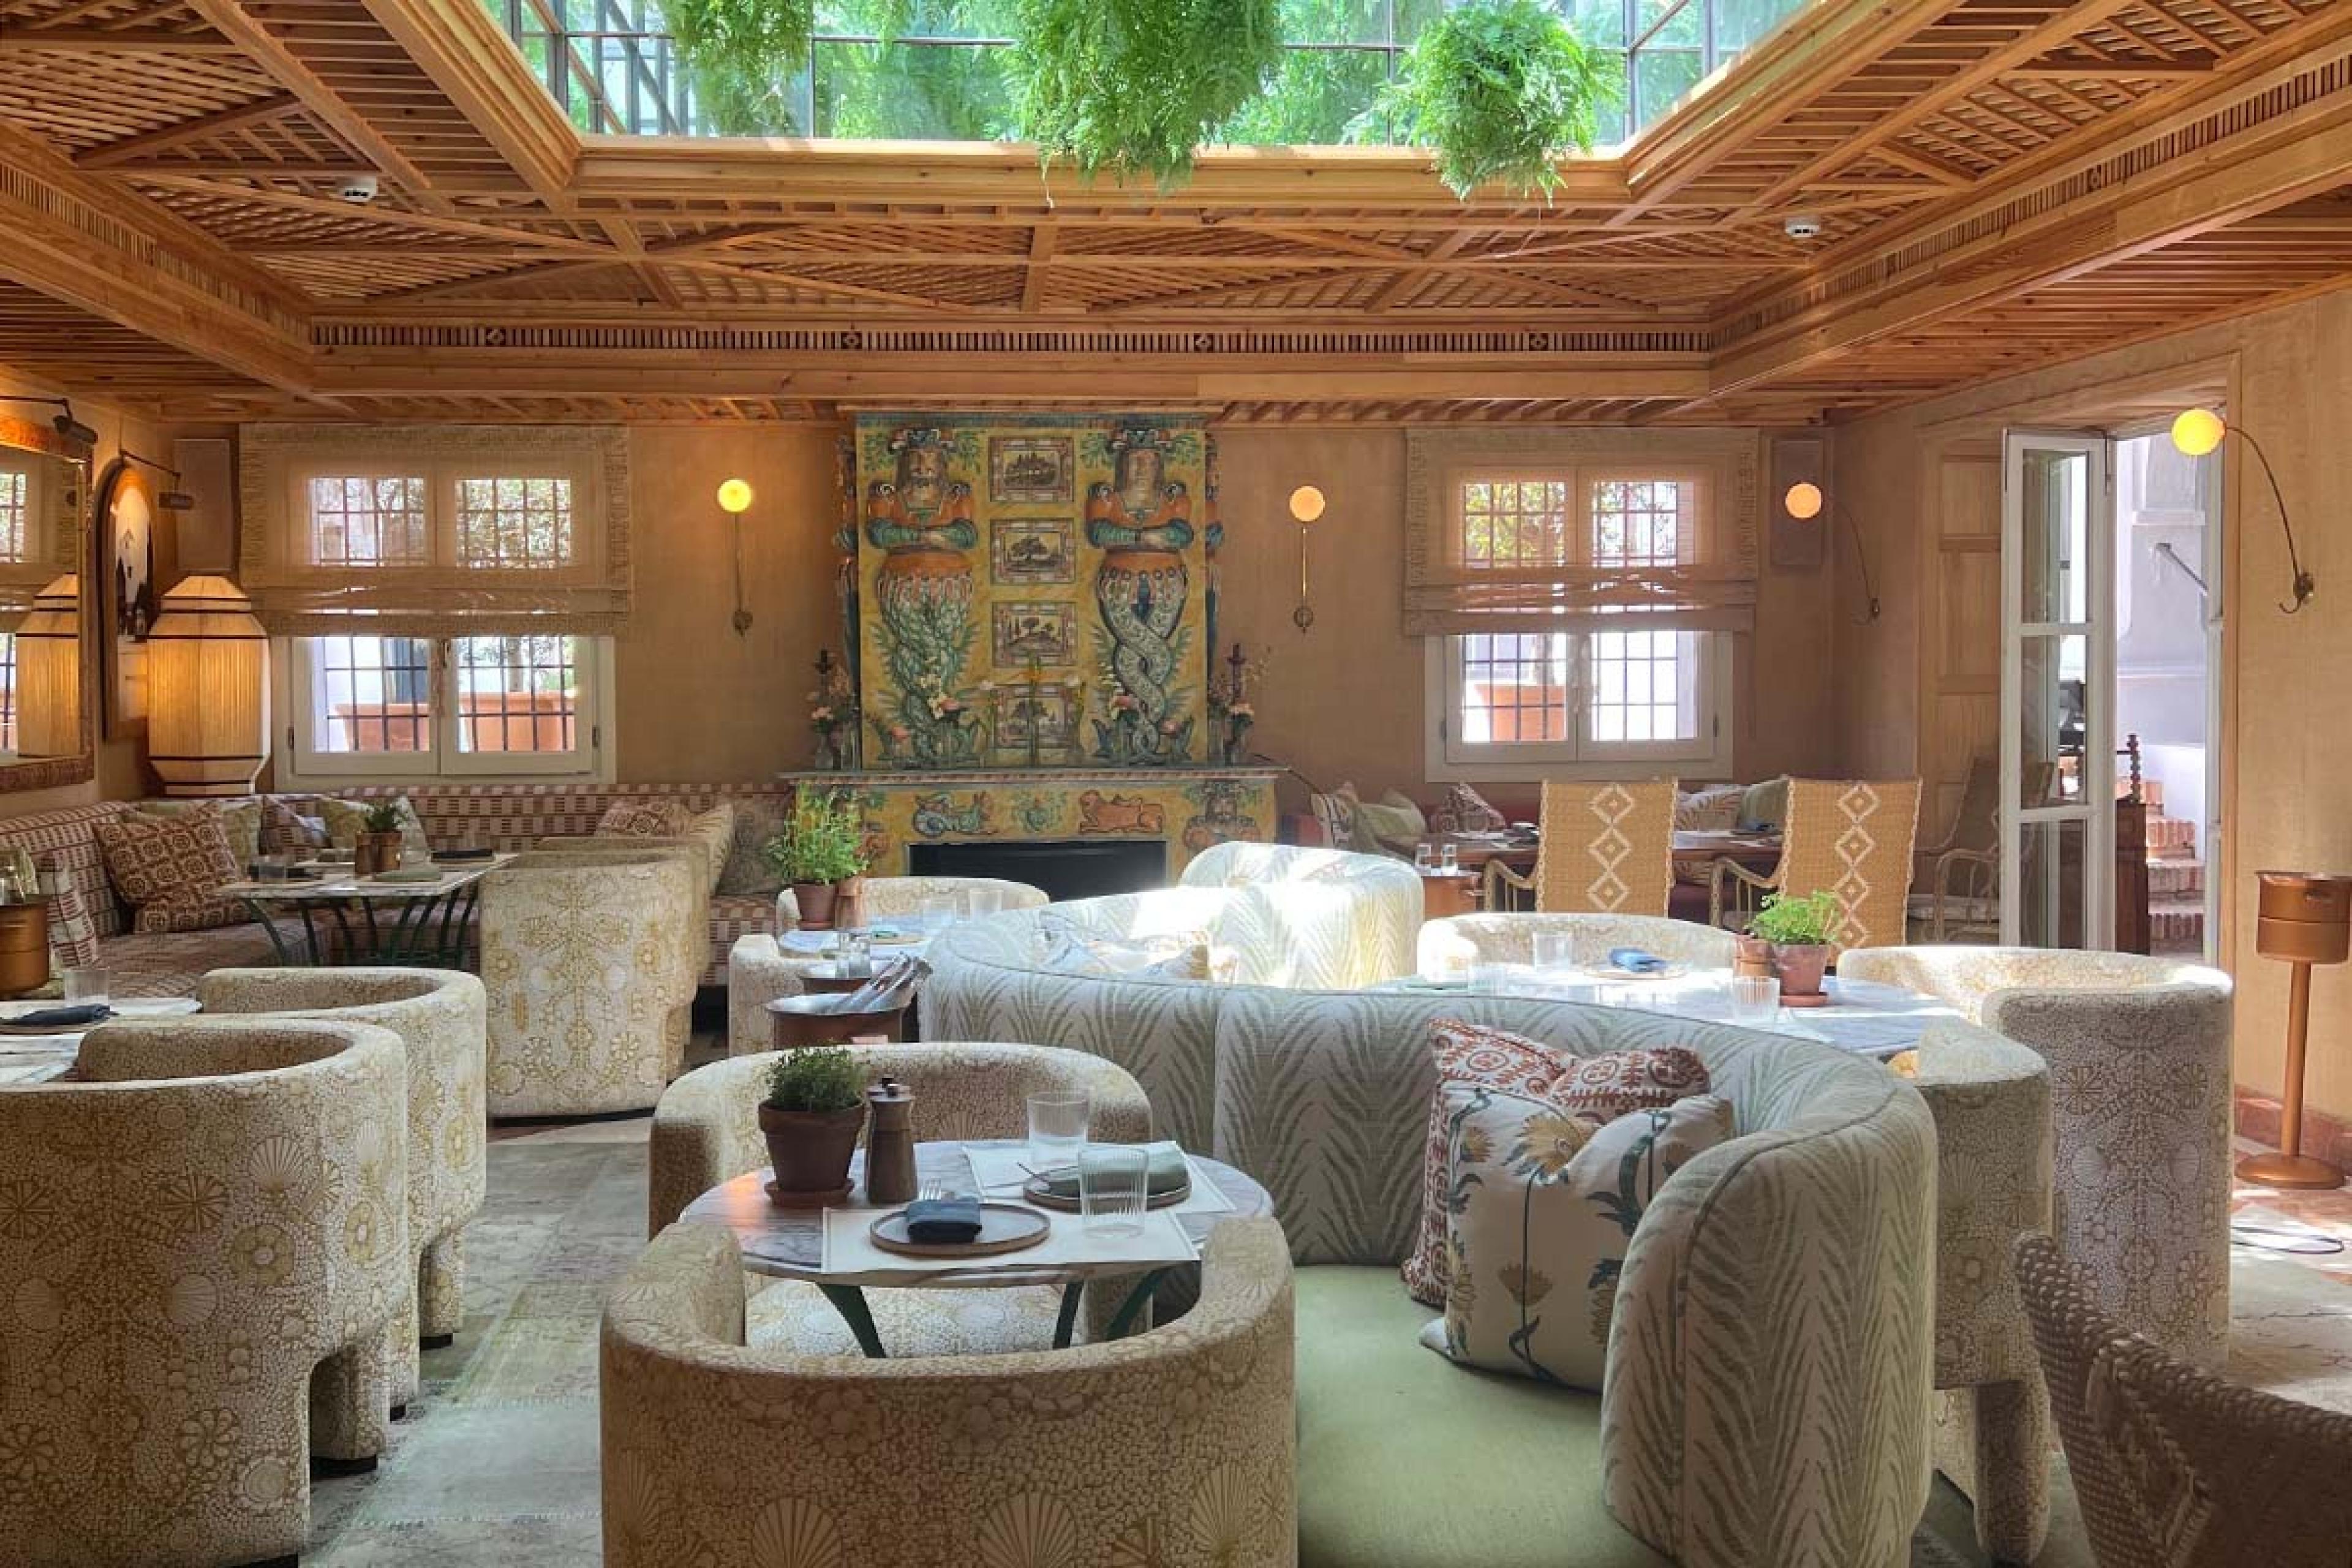 lounge with with patterned cushioned chairs, a woven wooden ceiling and sea creature paintings on the wall